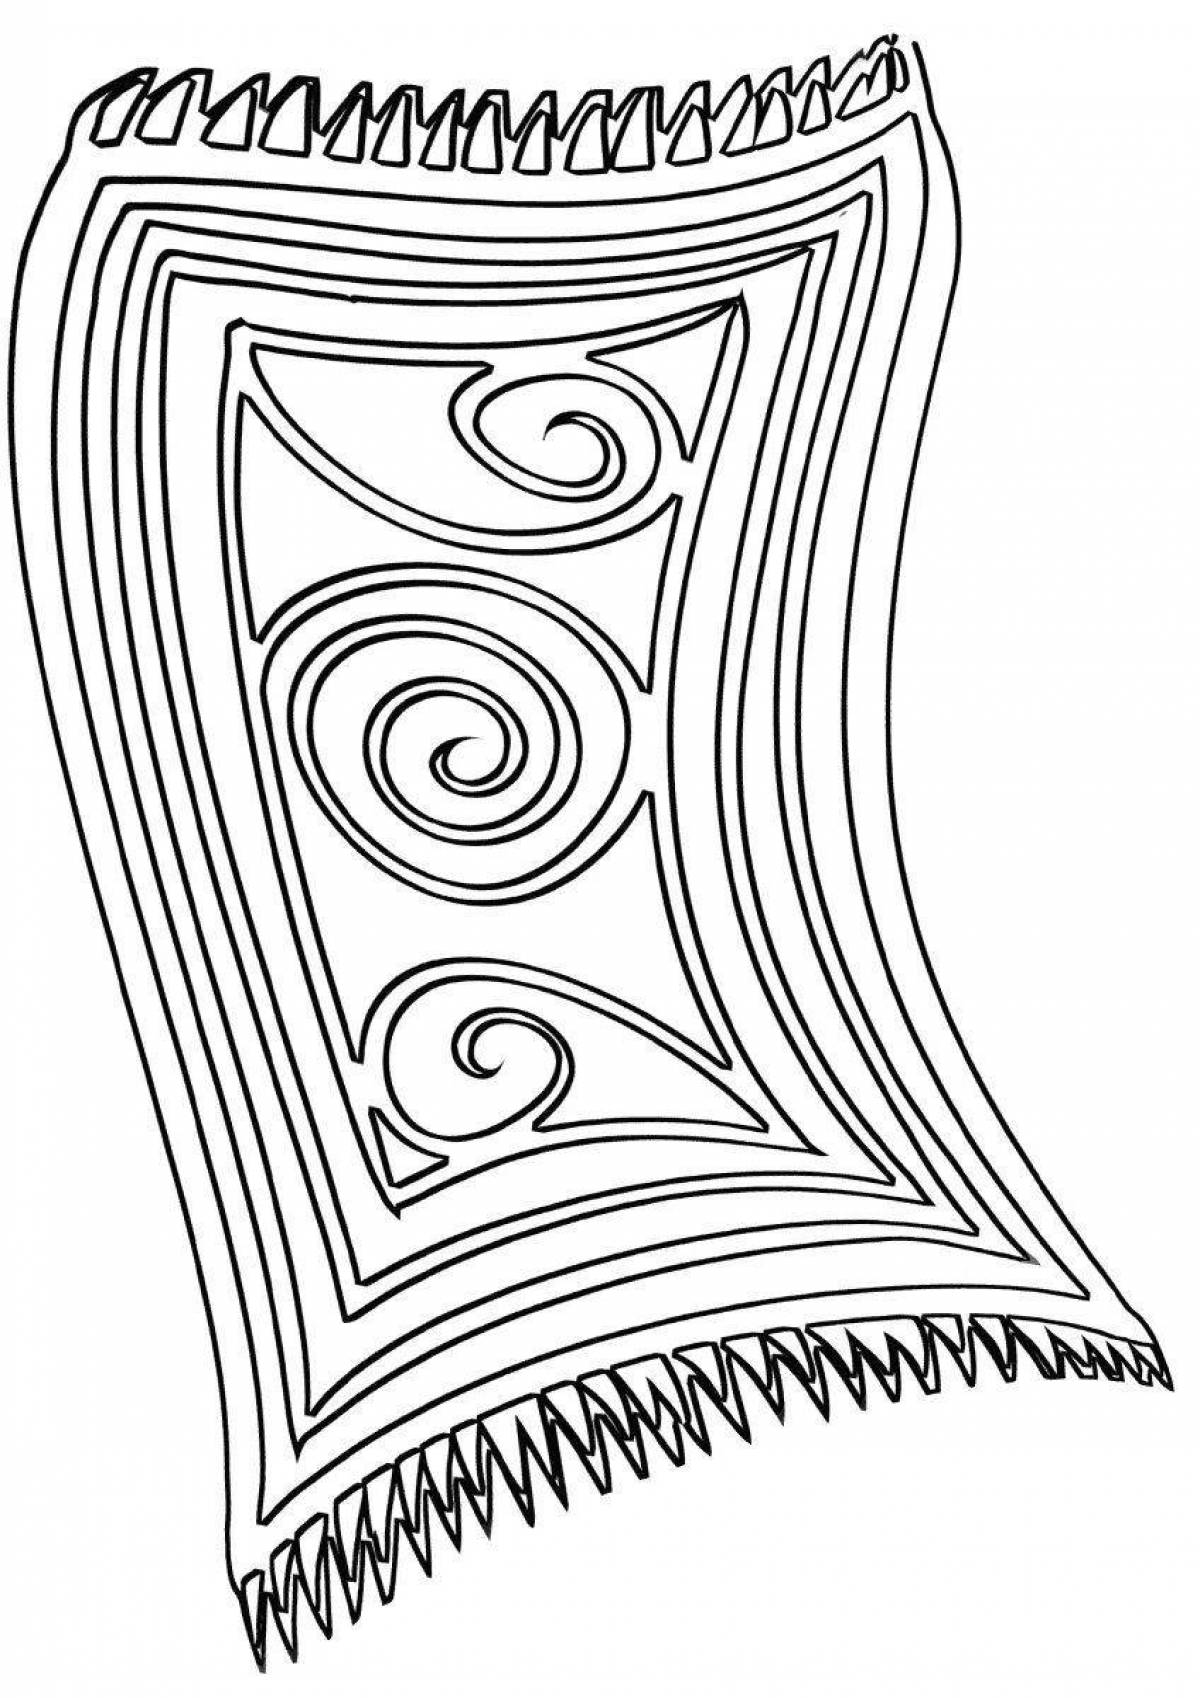 Gorgeous Flying Carpet coloring page